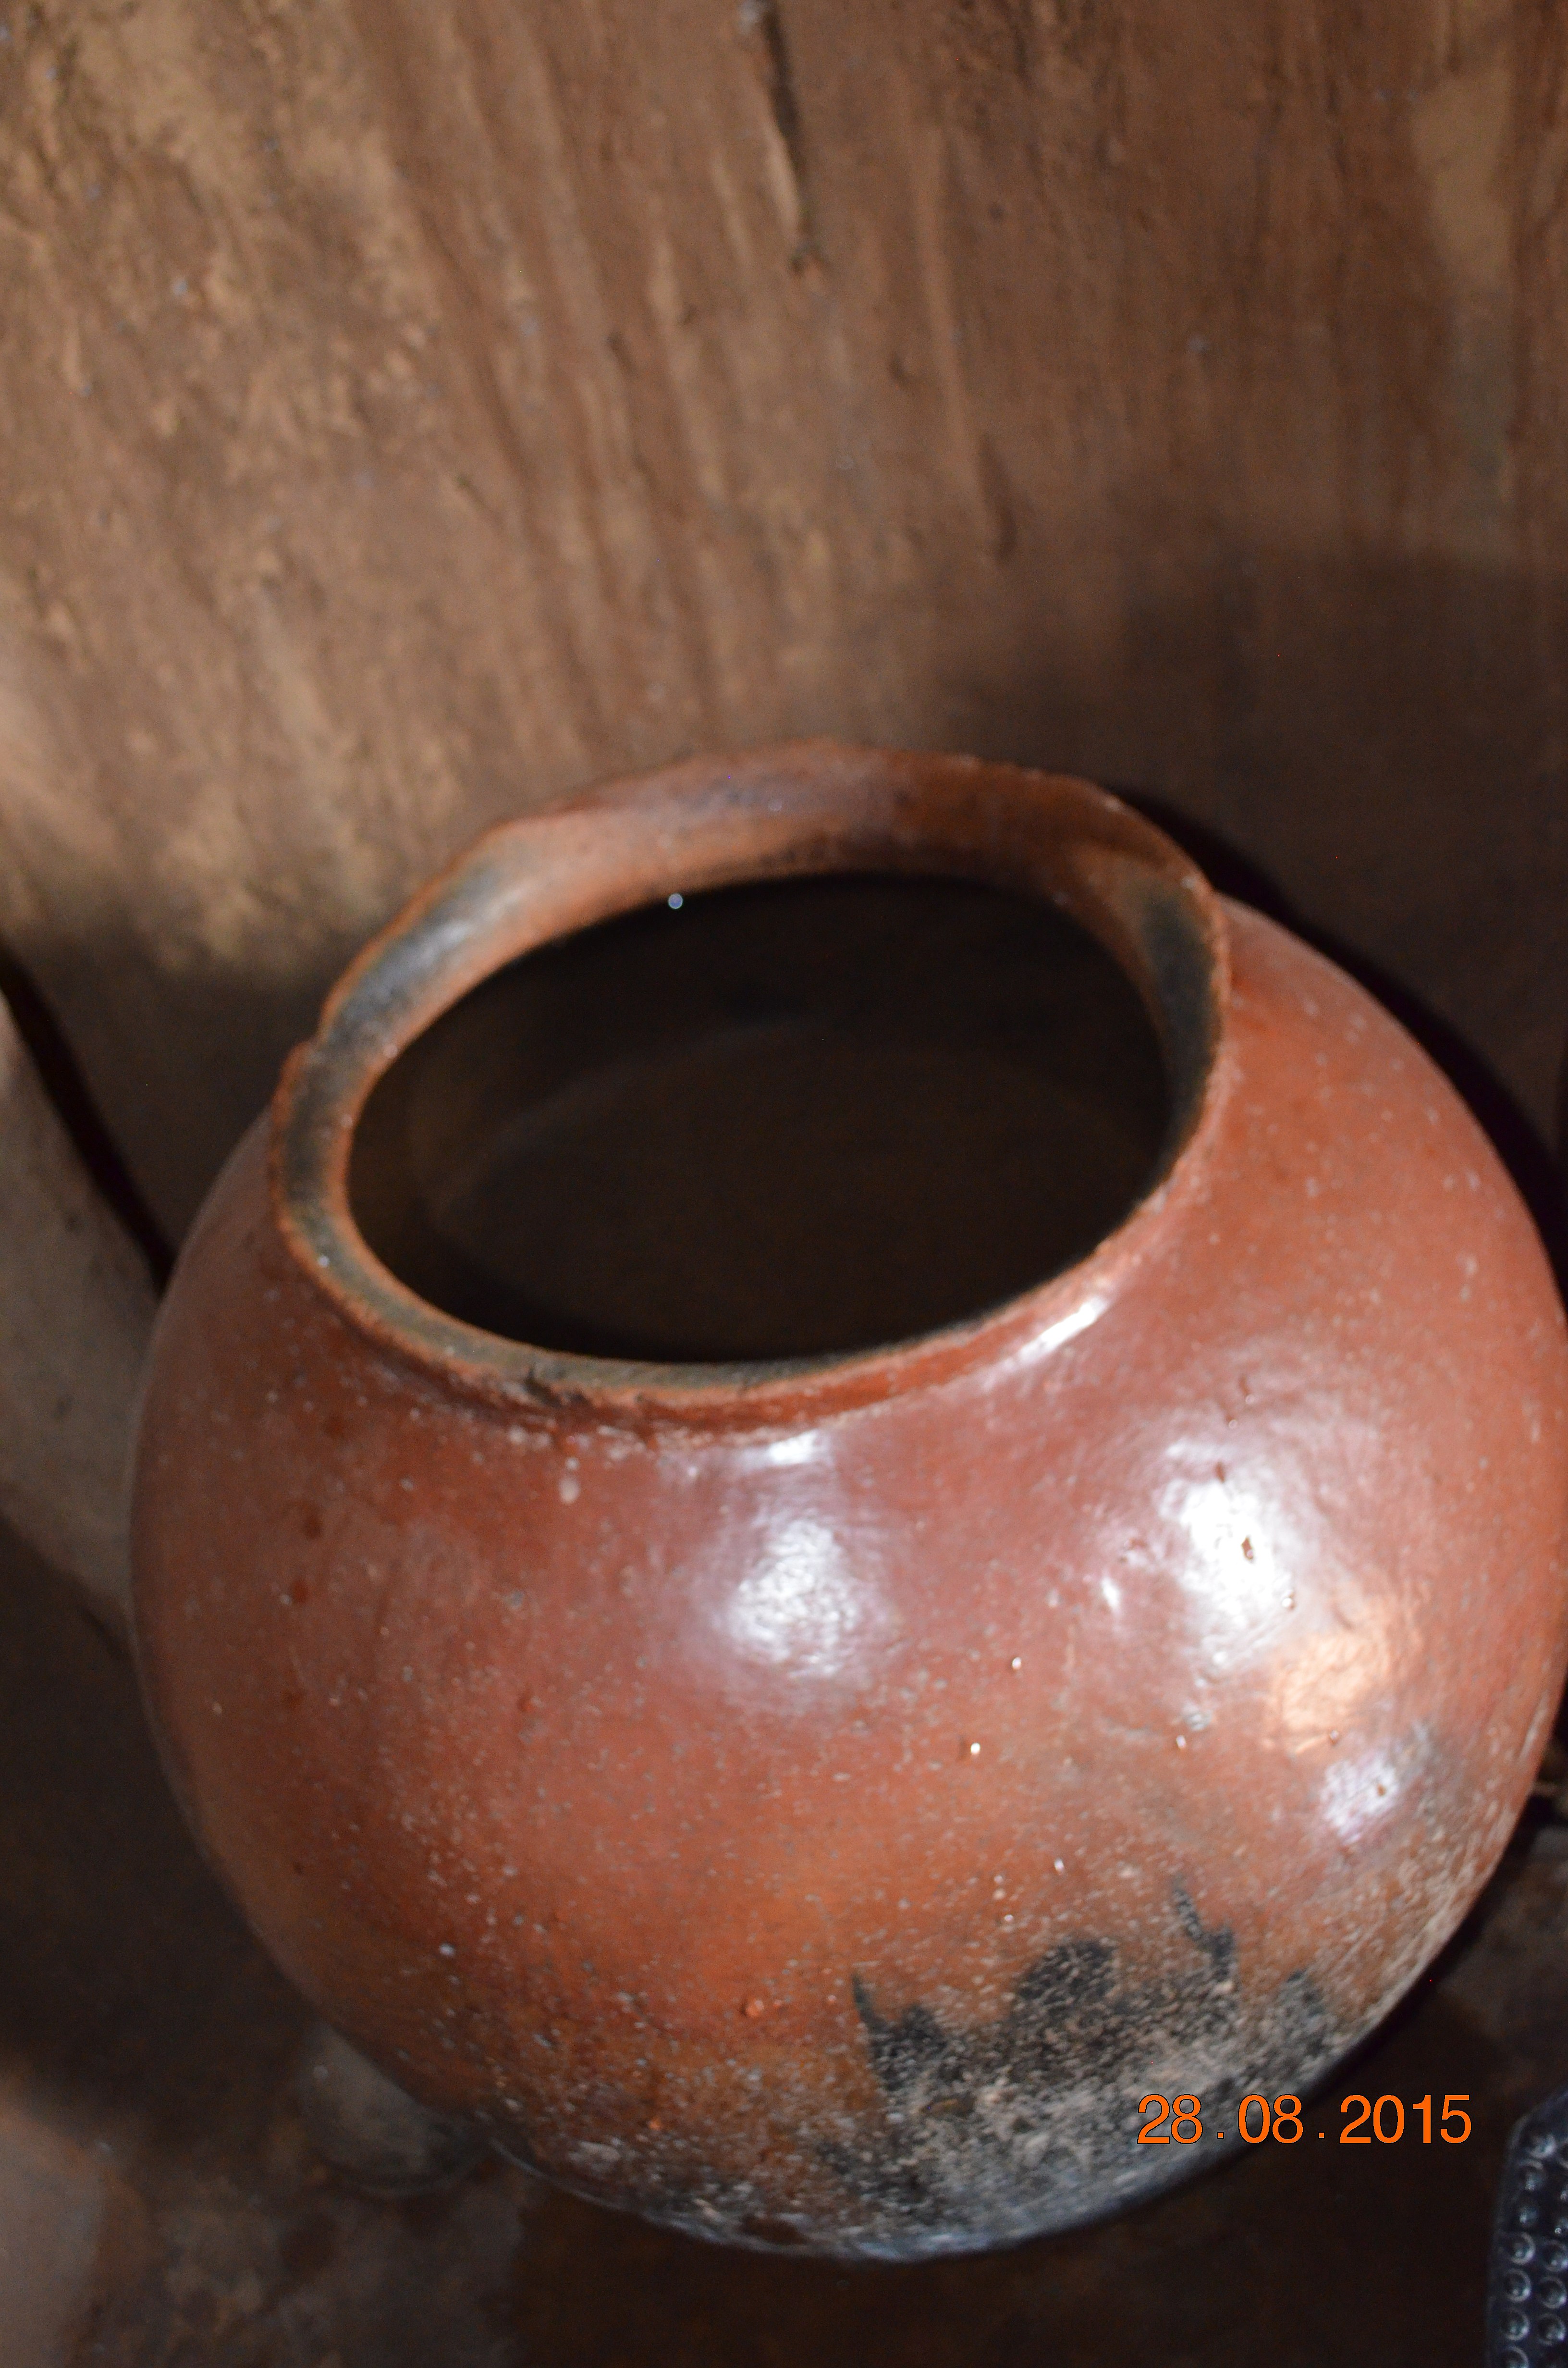 https://upload.wikimedia.org/wikipedia/commons/thumb/d/d7/Clay_Pot_From_Northern_Ghana.jpg/3264px-Clay_Pot_From_Northern_Ghana.jpg